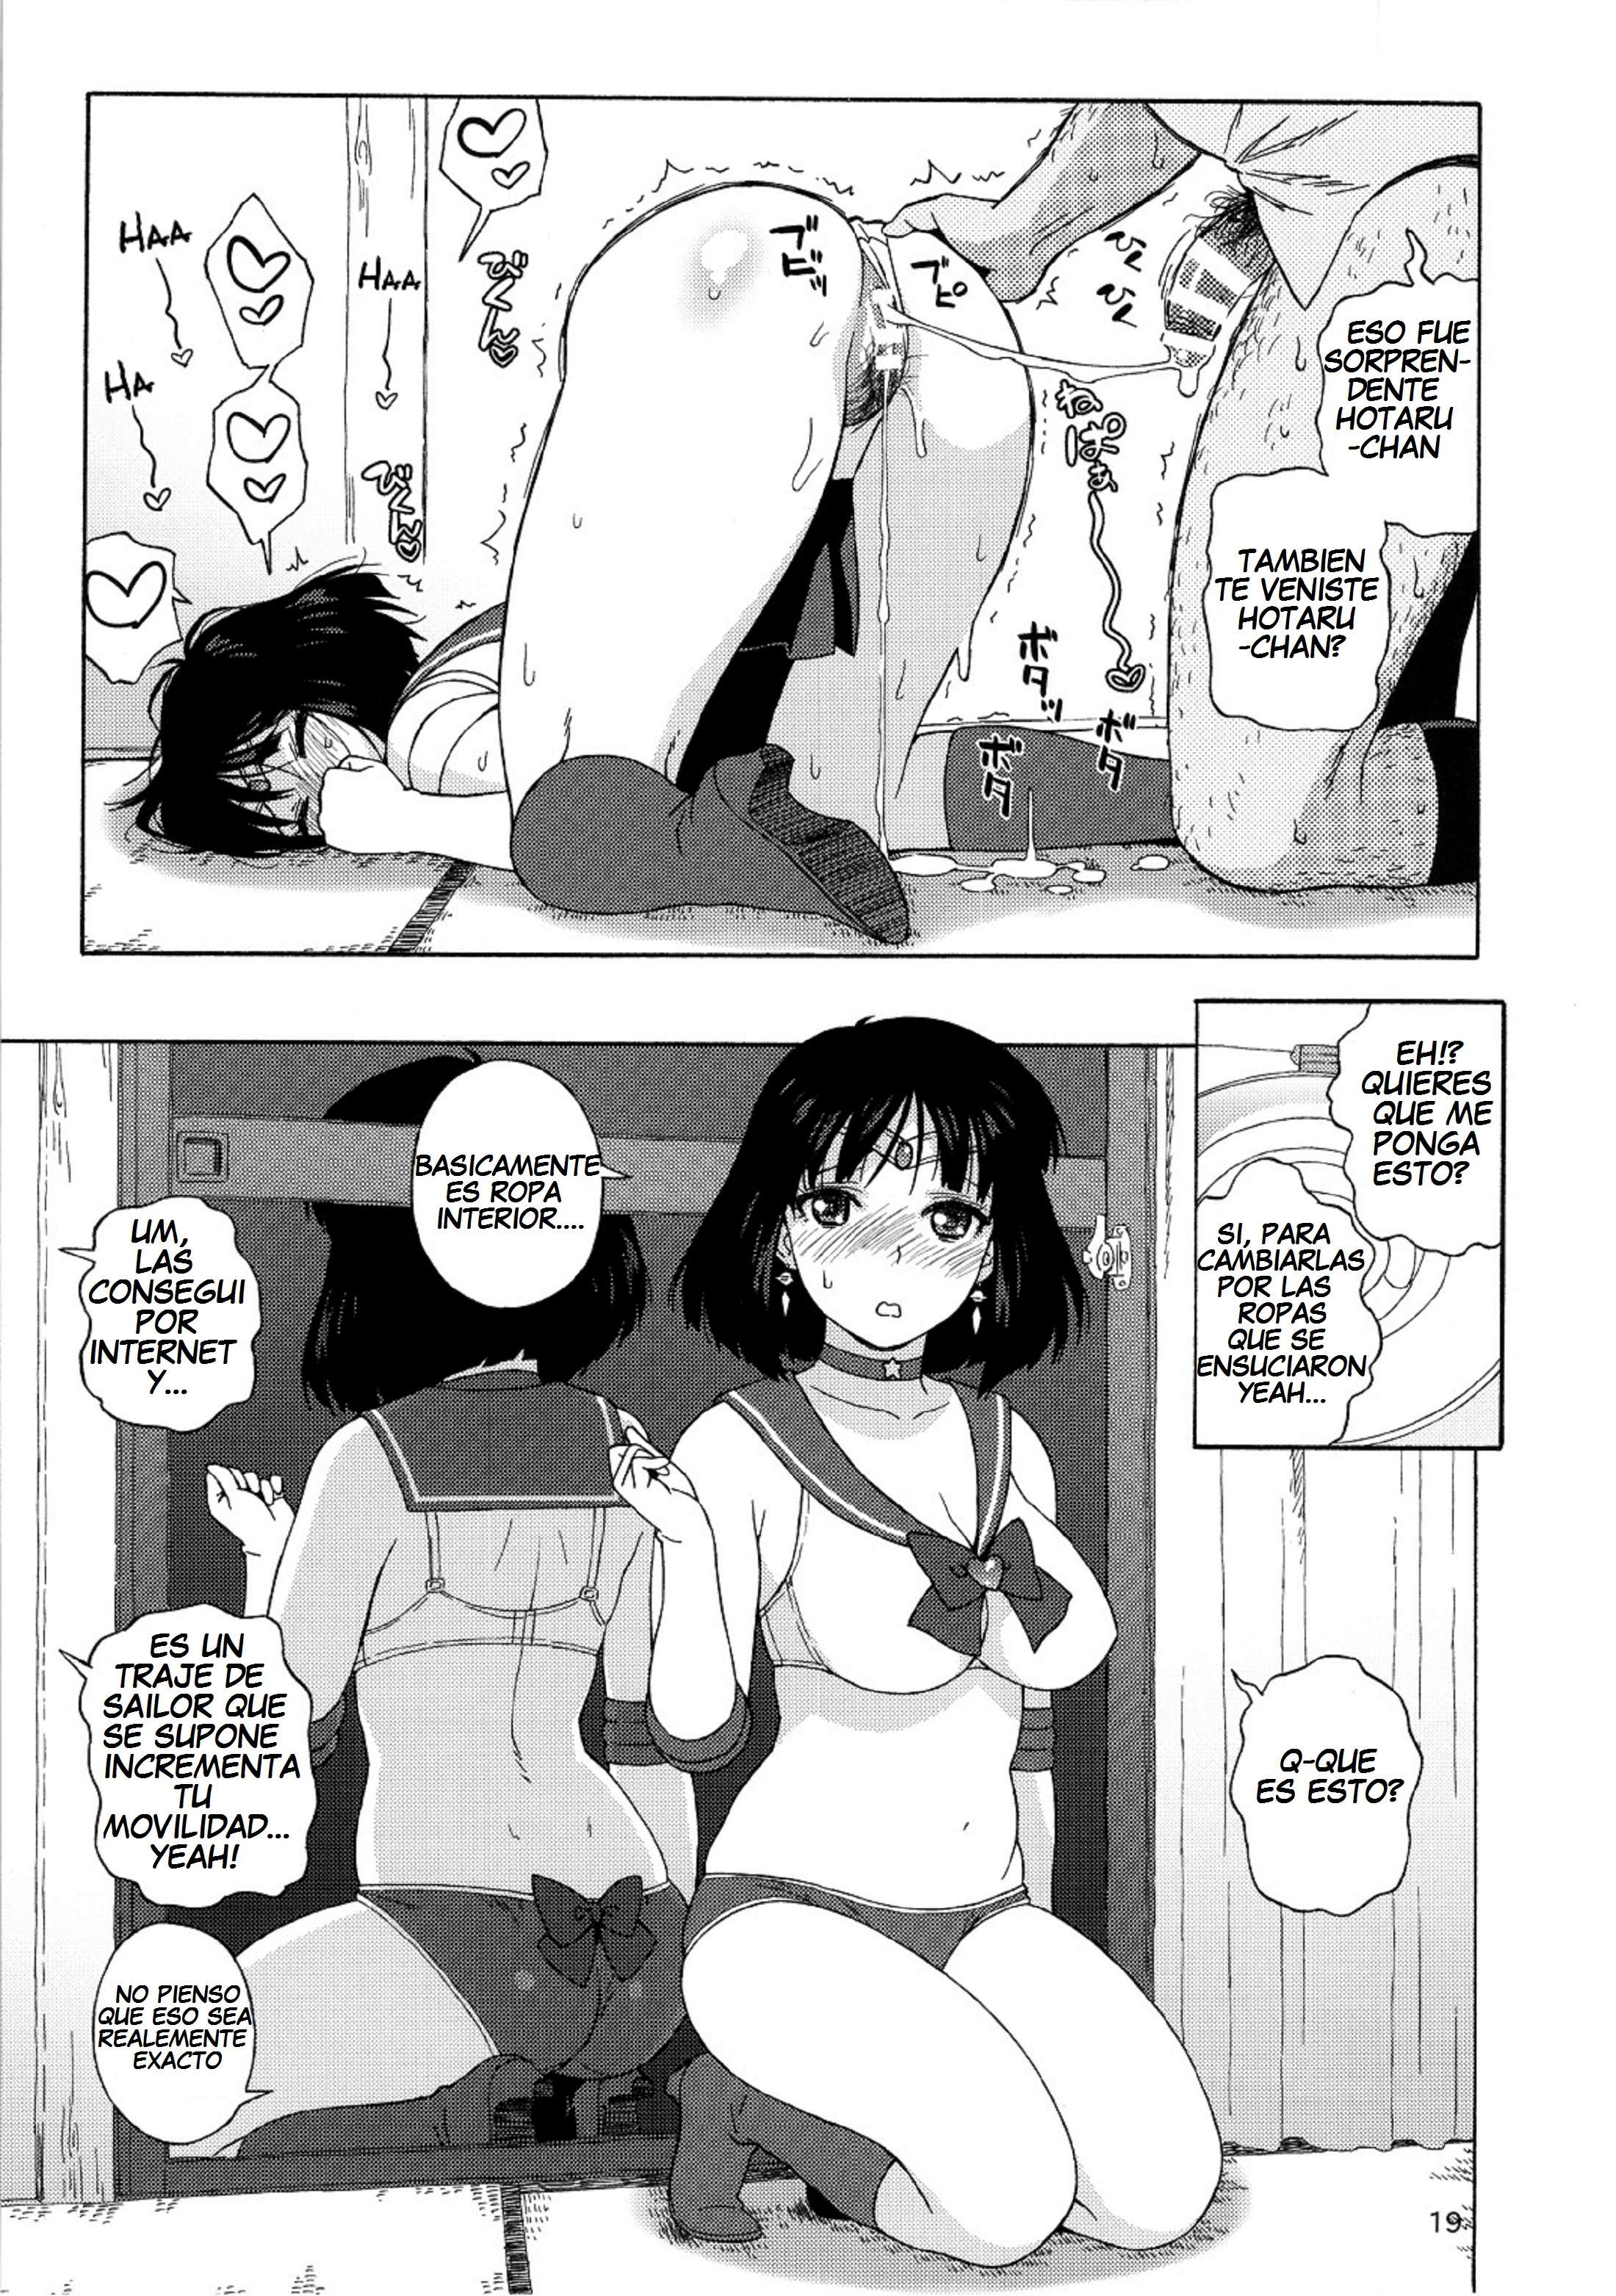 A Method to Marry Hotaru-chan the JK Chapter-1 - 17